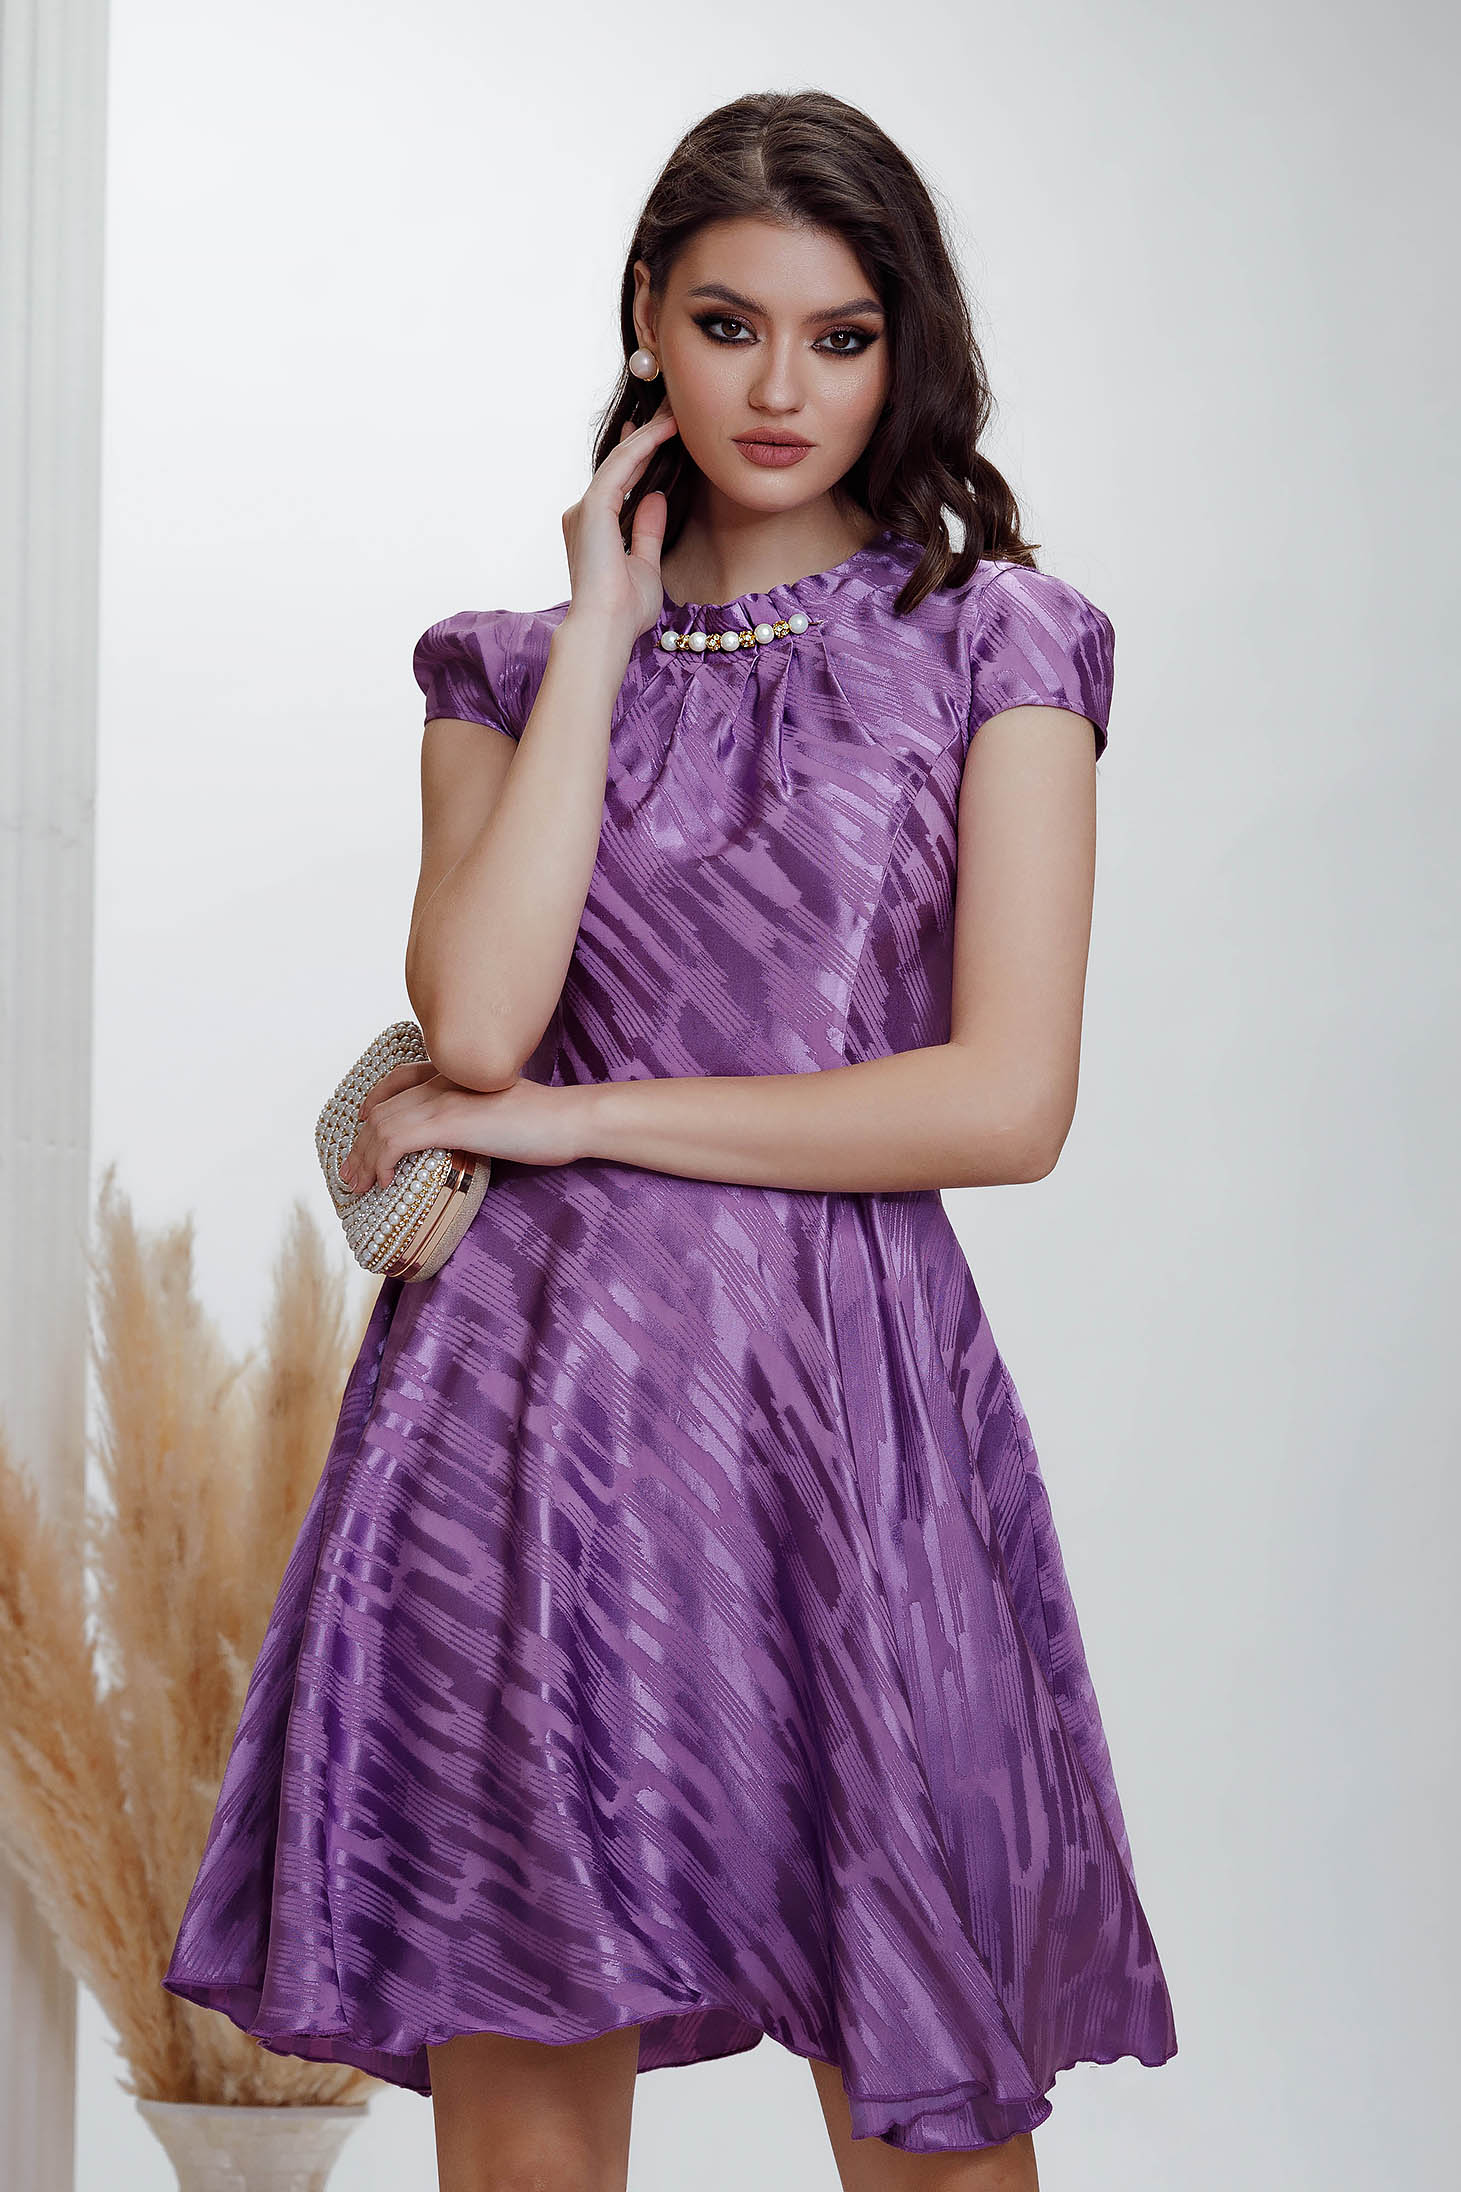 Purple dress from satin fabric texture cloche lateral pockets metallic chain accessory